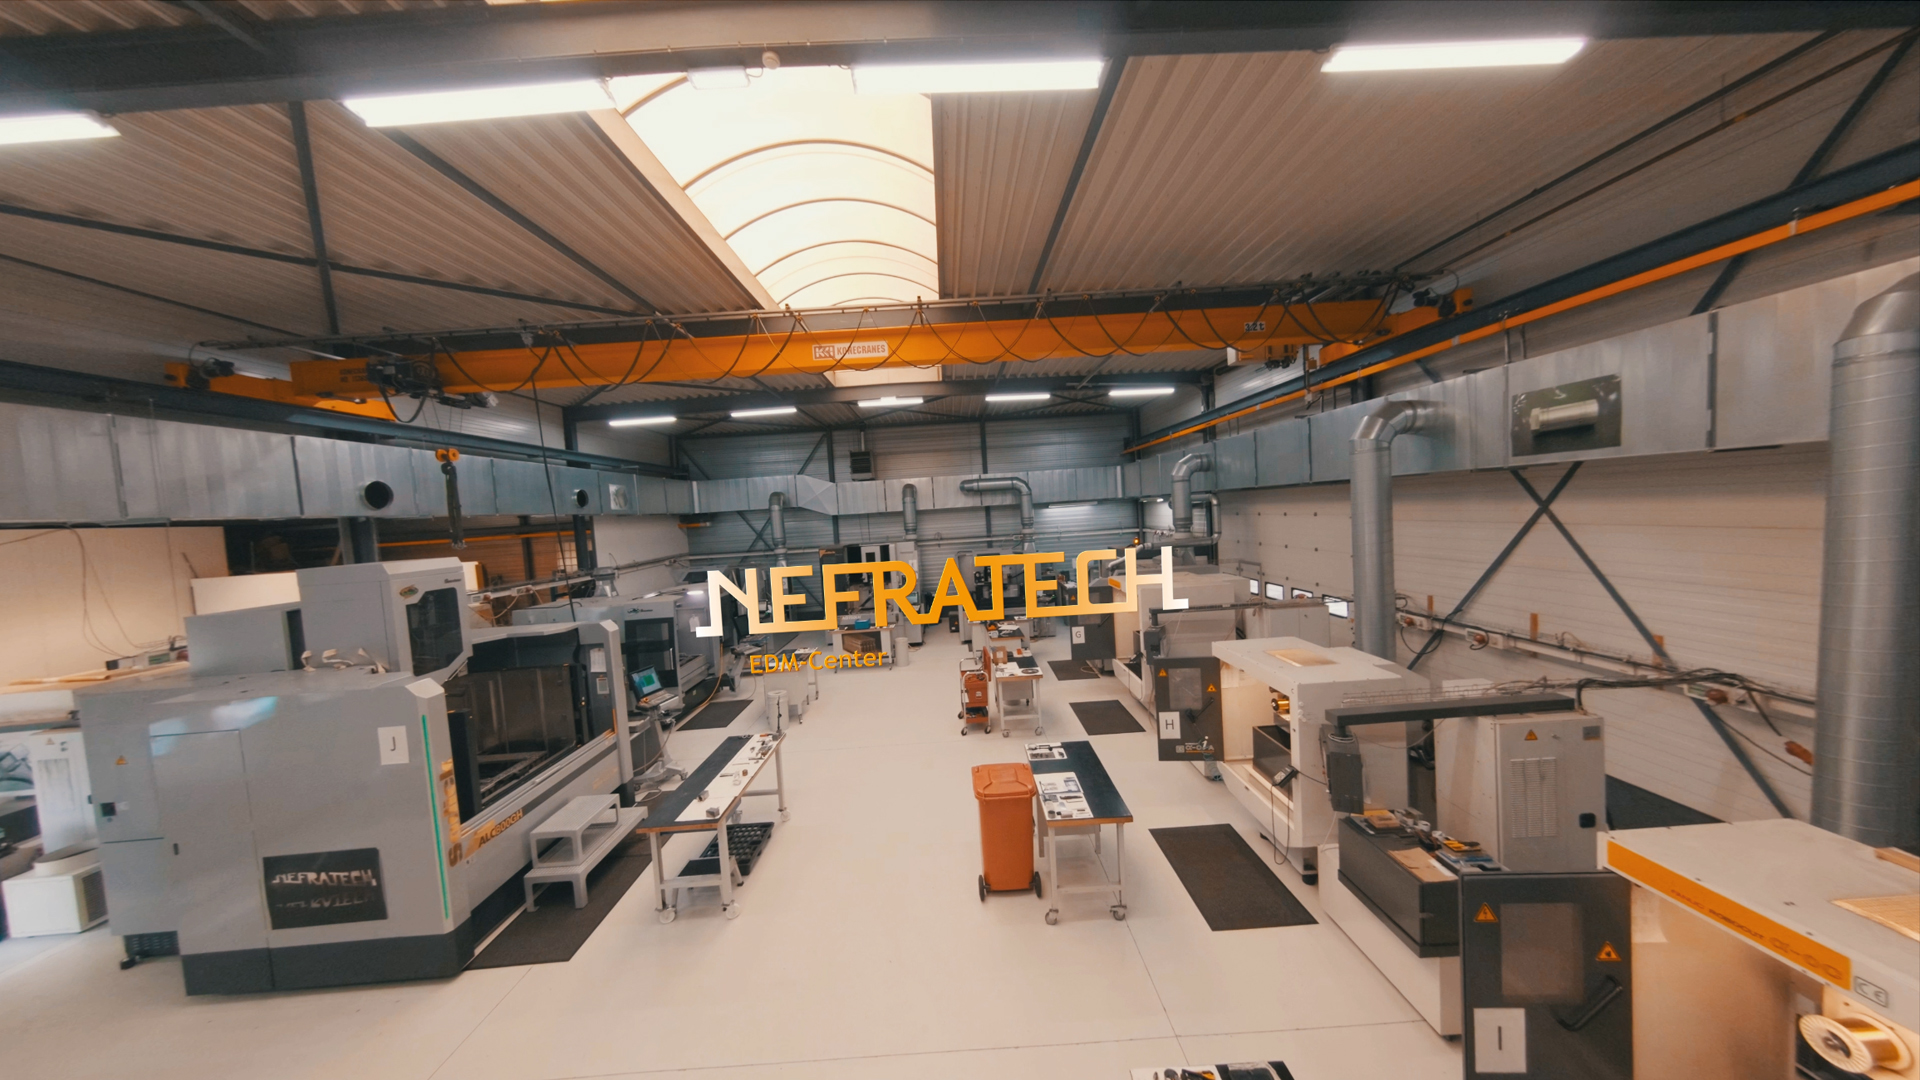 Film Tale FPV Indoor Drone Tour Nefratech